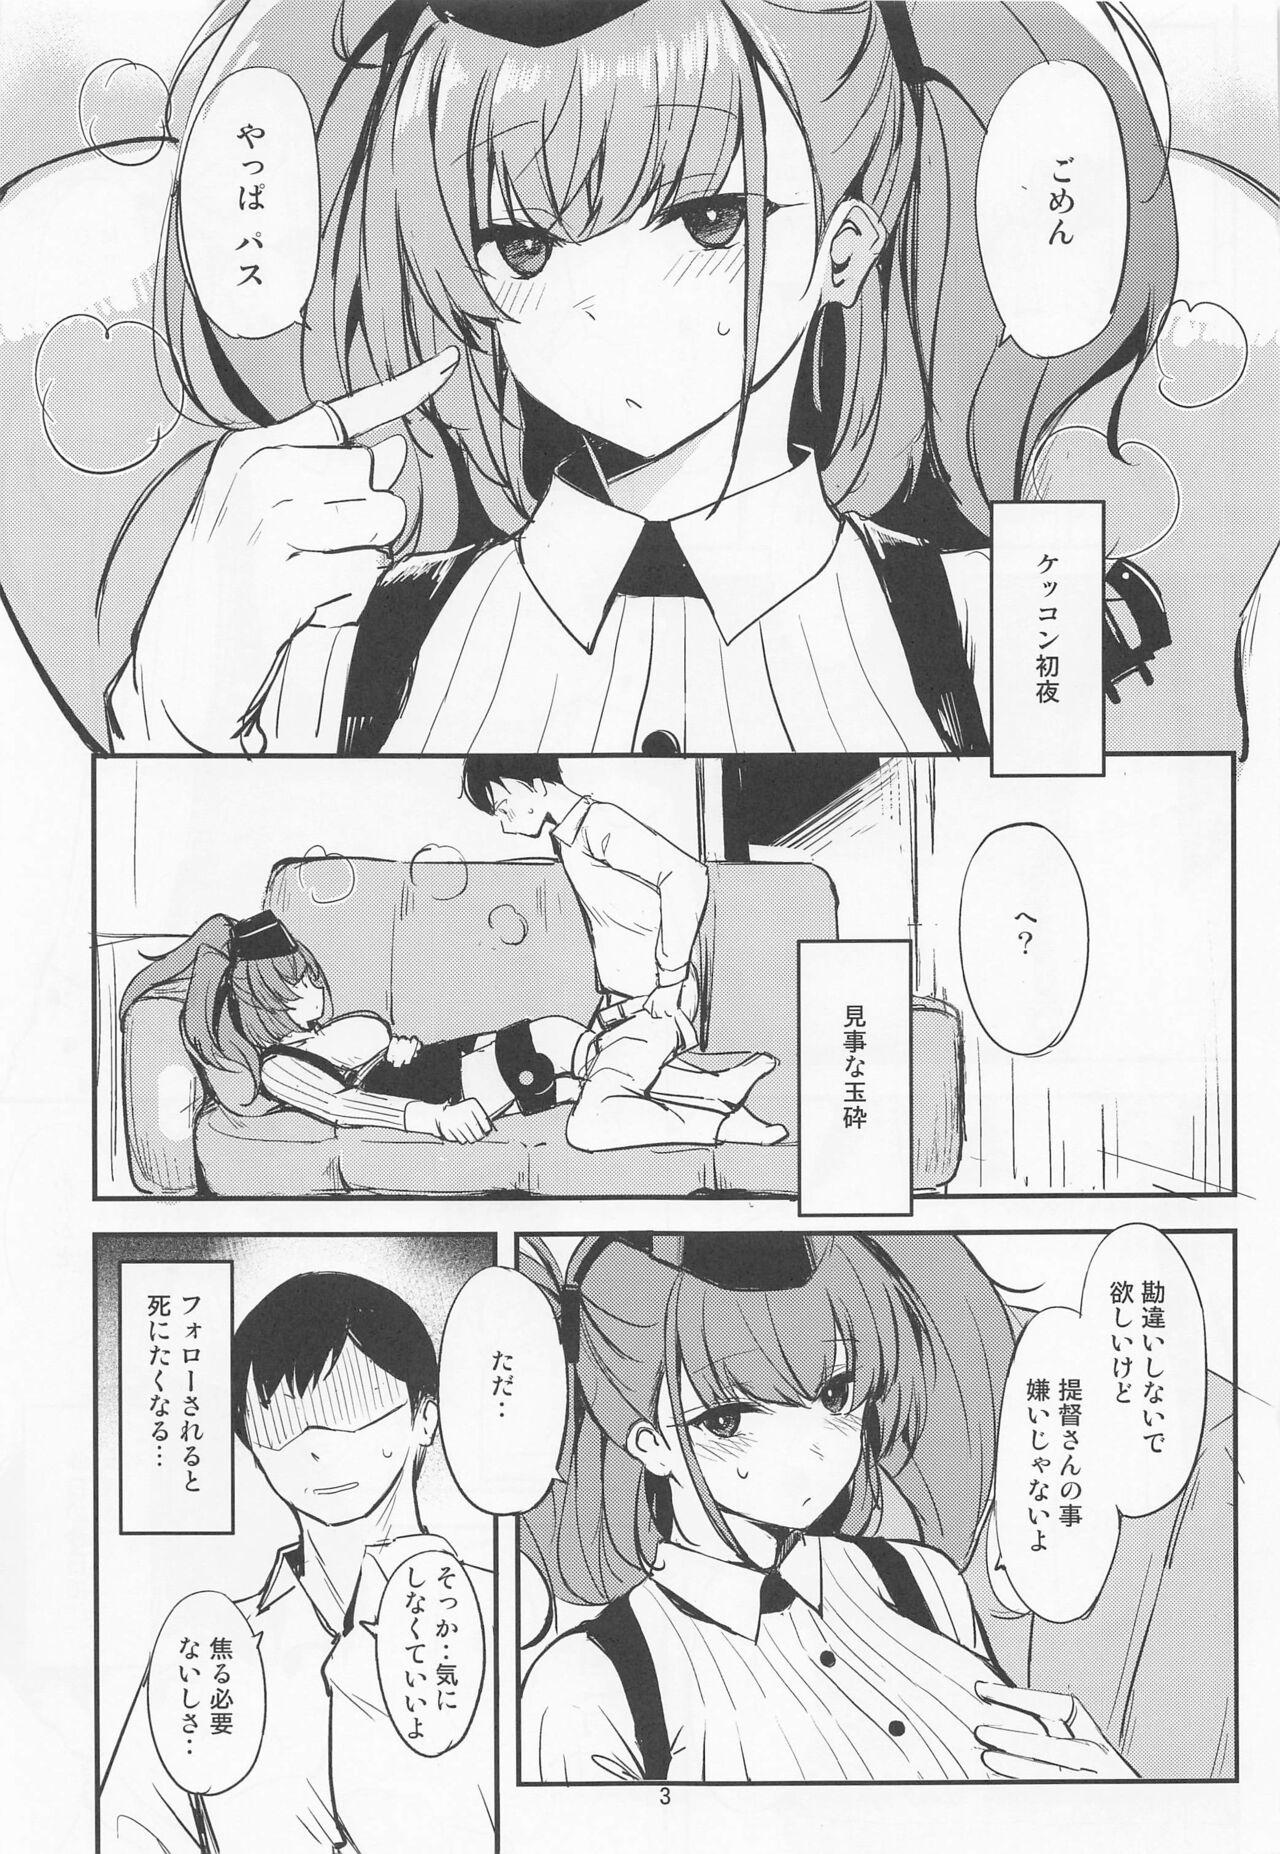 Reversecowgirl Sex to Coffee - Kantai collection Girls - Page 2